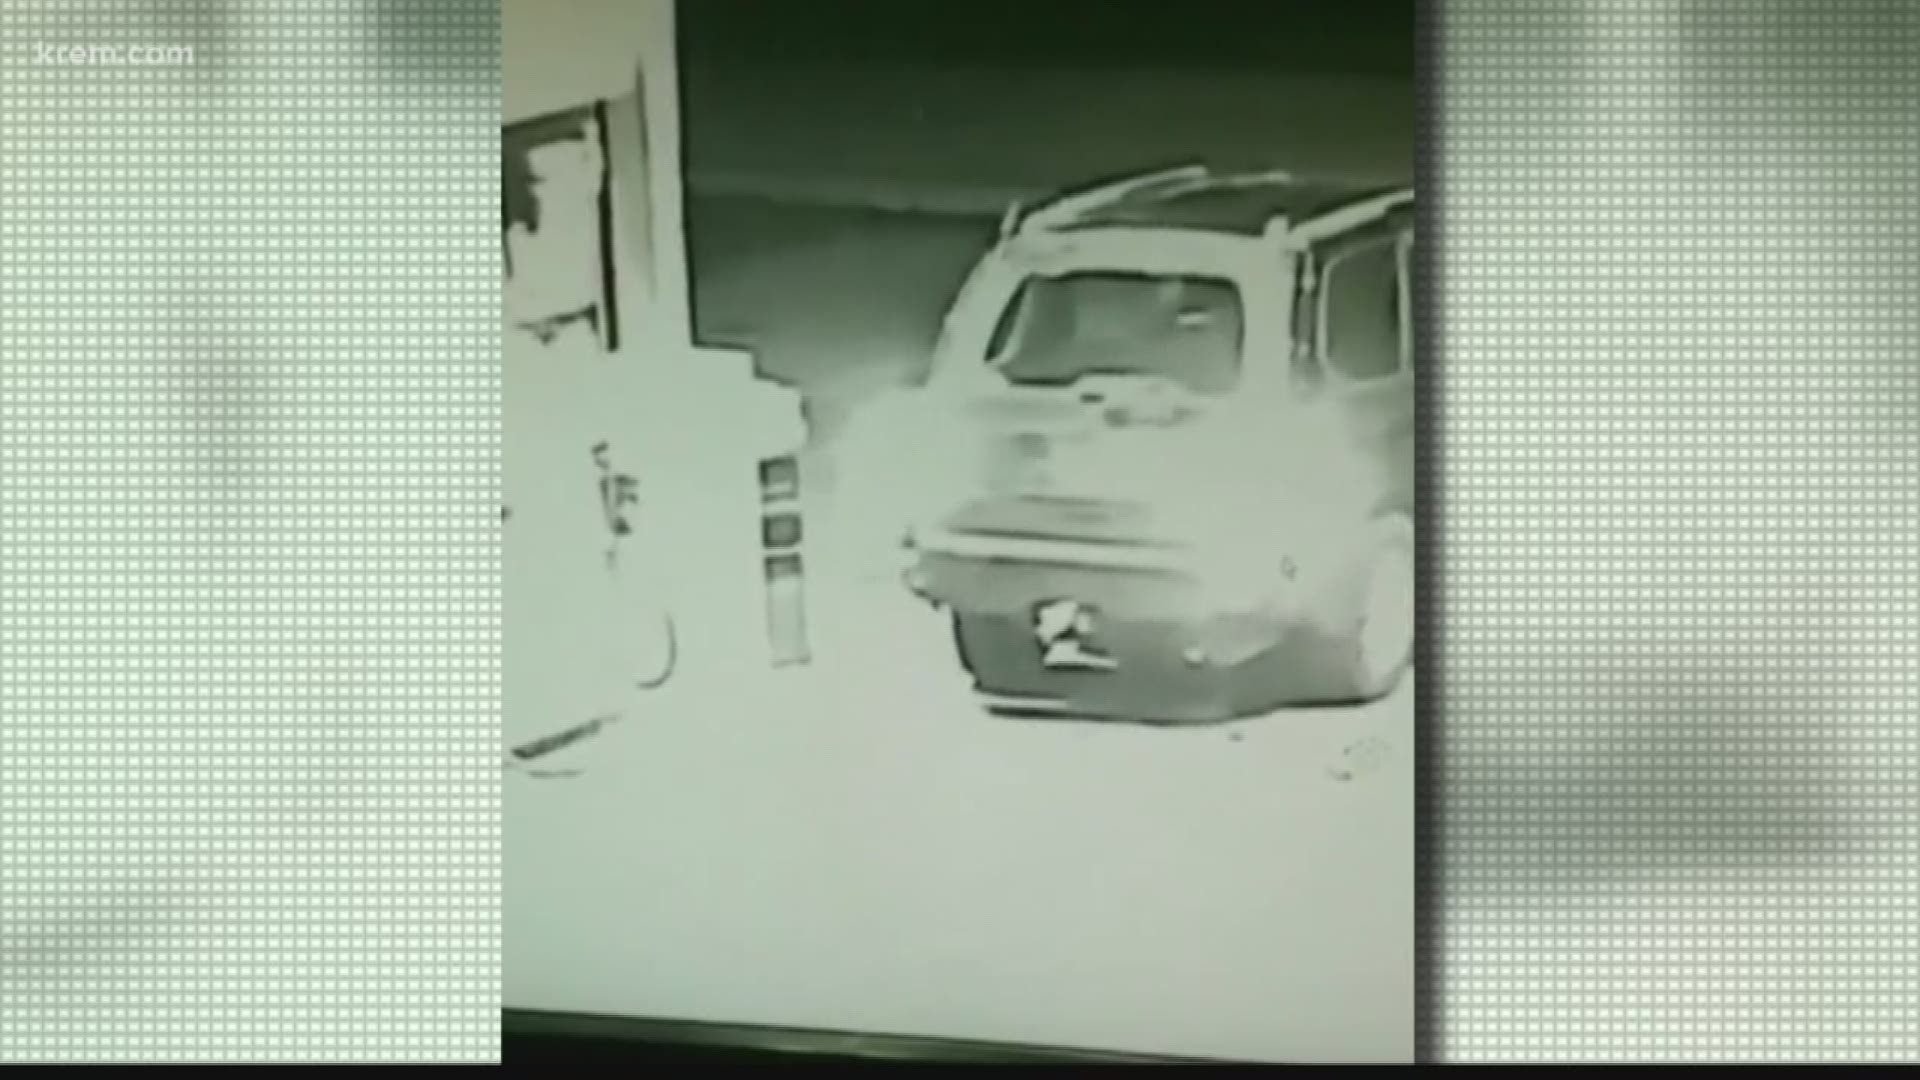 In surveillance video from the Hico on Perry Street in Spokane you can see Alexandra Pearson begin to pull away from the gas pump. As she did the window of her 2007 GMC Envoy shatters.